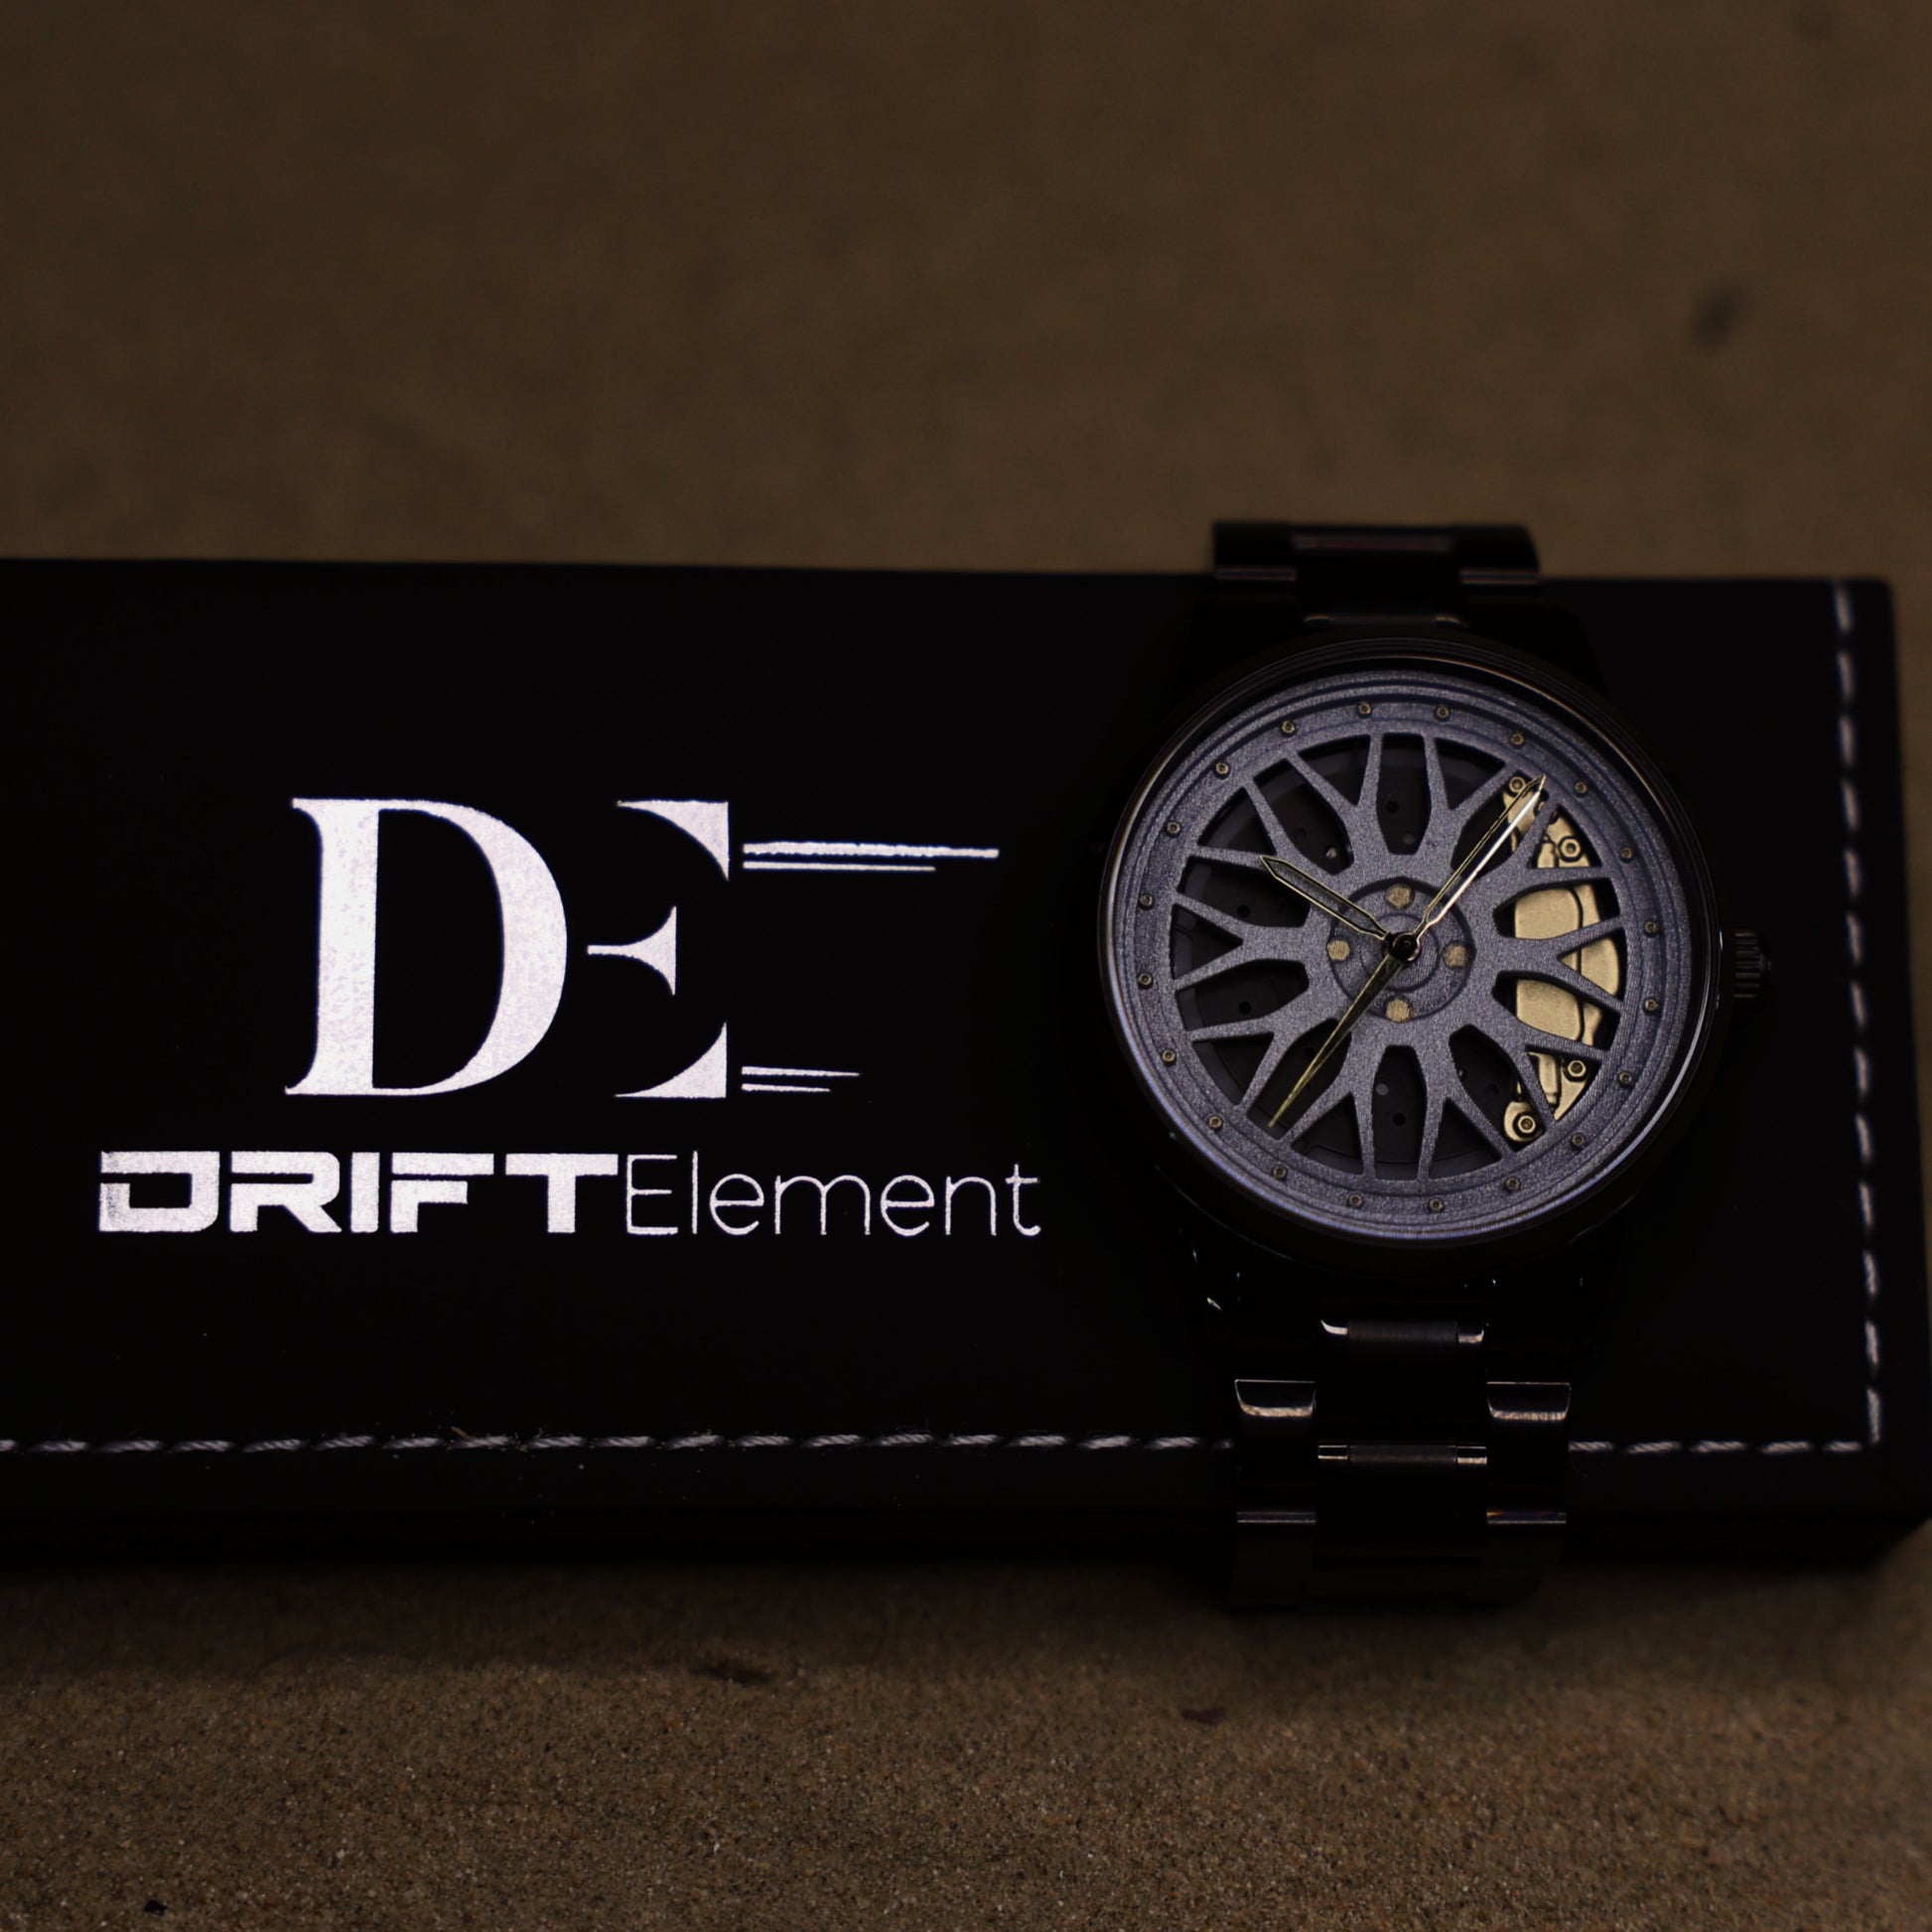 The Final Edition watch by DriftElement, presented on its packaging, features a unique rim-inspired face, showcasing the creative and innovative design that the young German startup is known for in its timepieces.